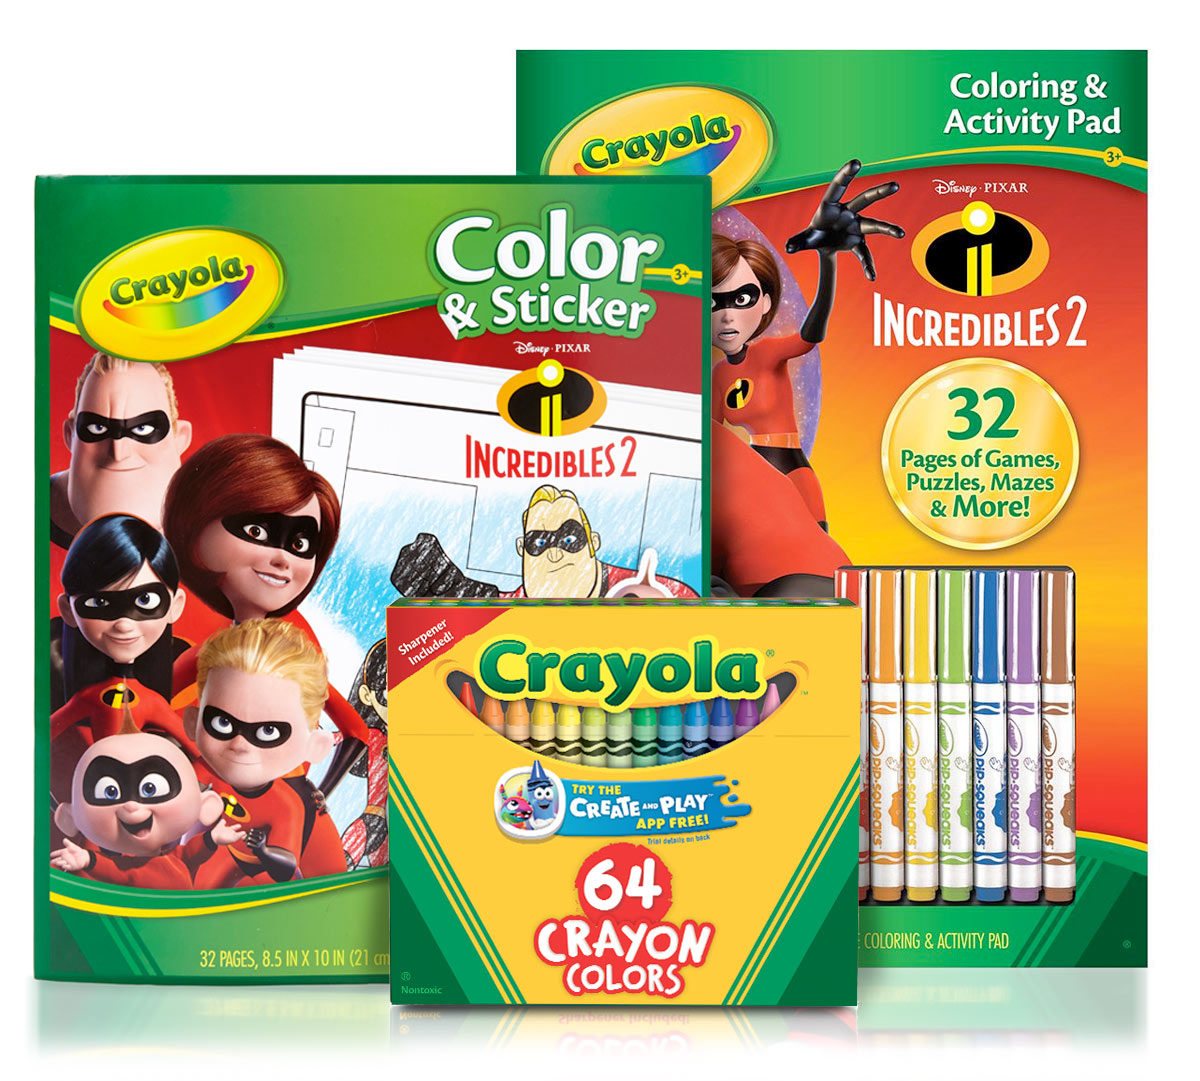 Gift for Boys and Girls 6 and Up 5 Travel Kids Holiday Gifting Arts and Crafts Ages 3,4 Gifting Crayola Disney The Incredibles 2 Giant Colouring Pages